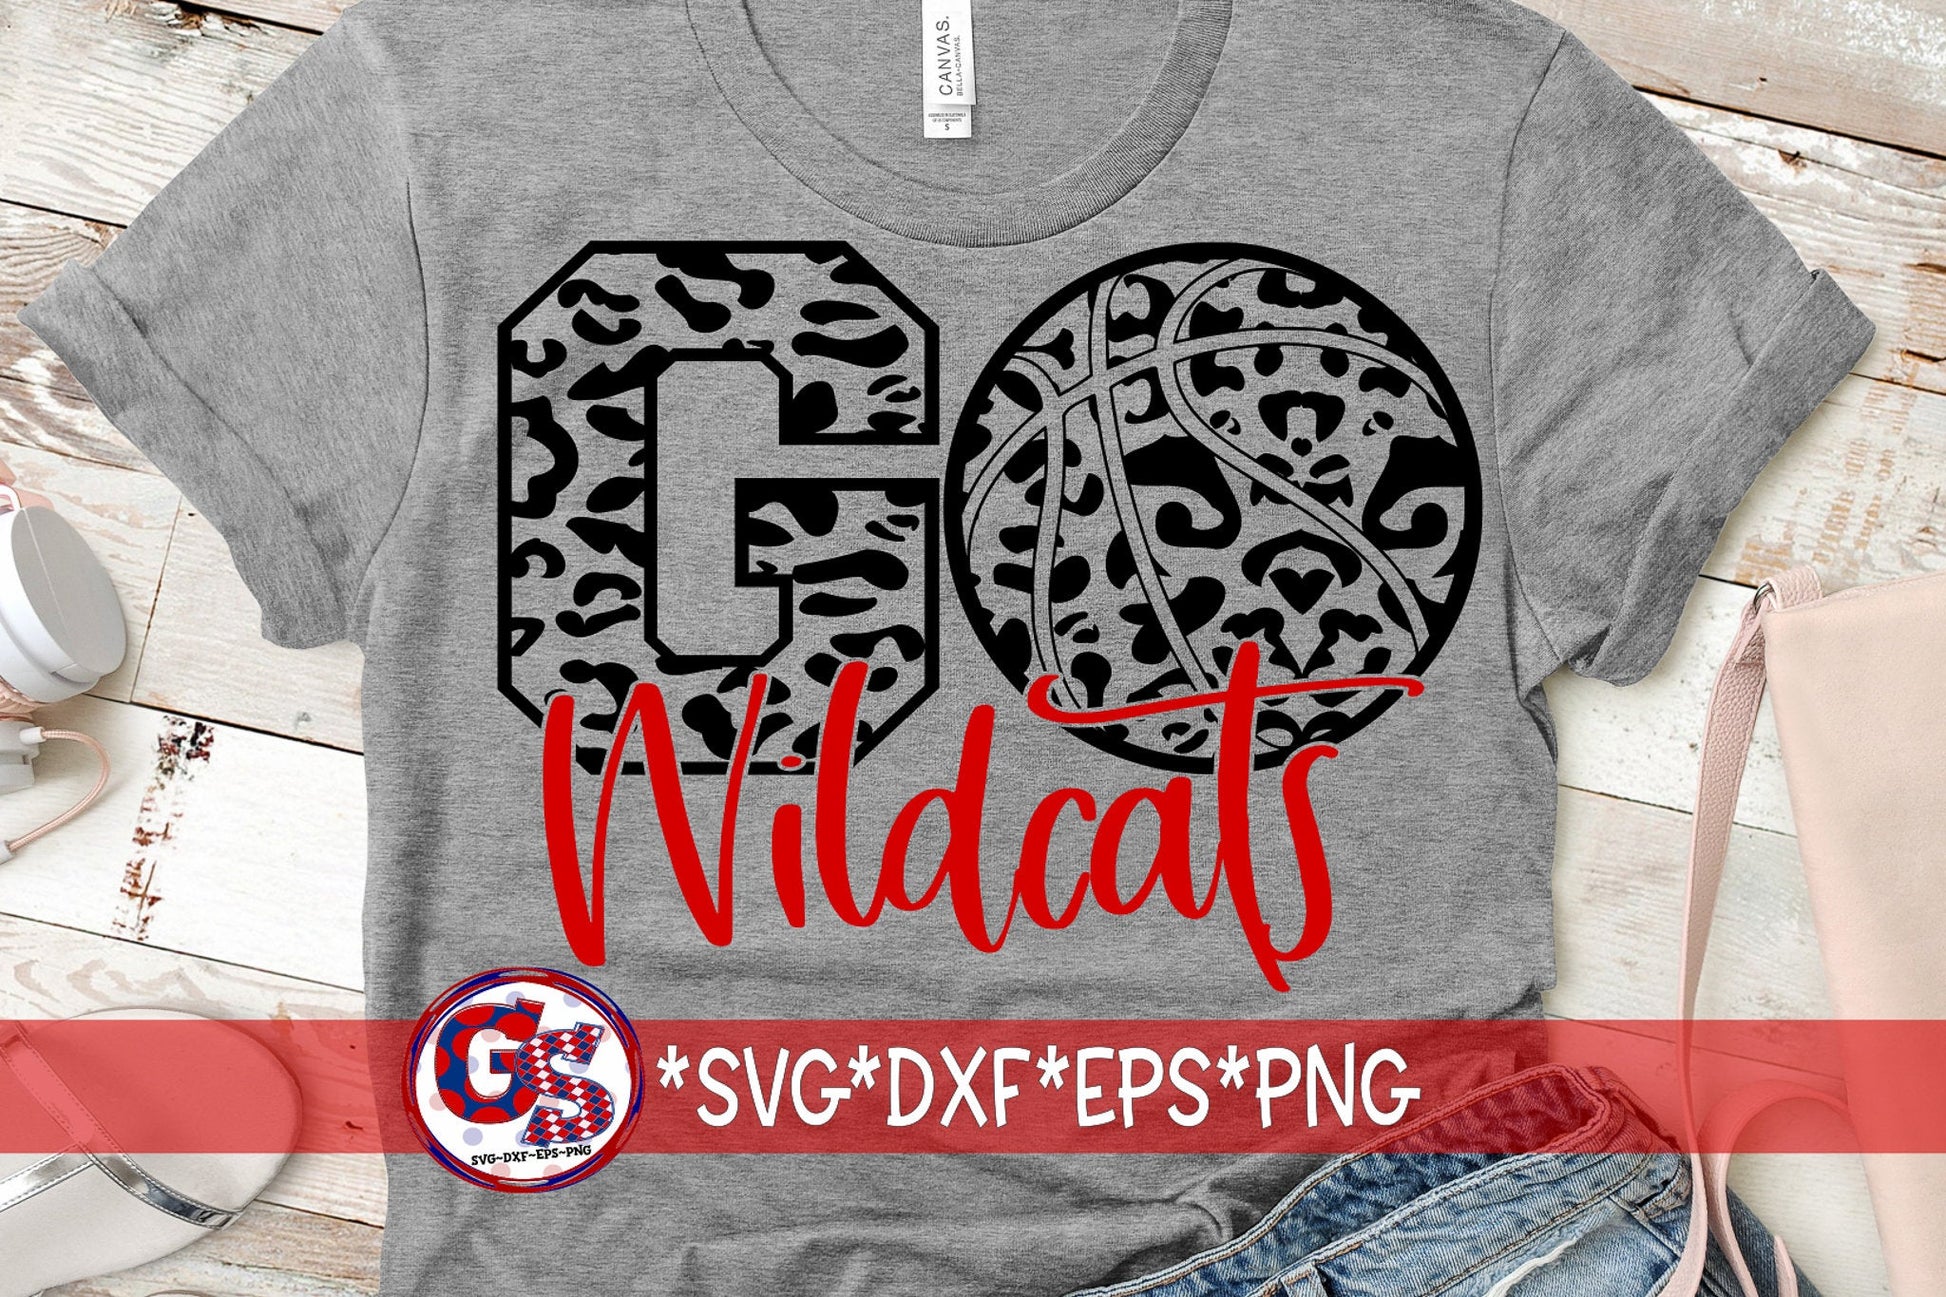 Wildcats SvG | Go Wildcats Basketball svg dxf eps png. Wildcats SvG | Go Wildcats Basketball Leopard DxF | Wildcats | Instant Download Cut